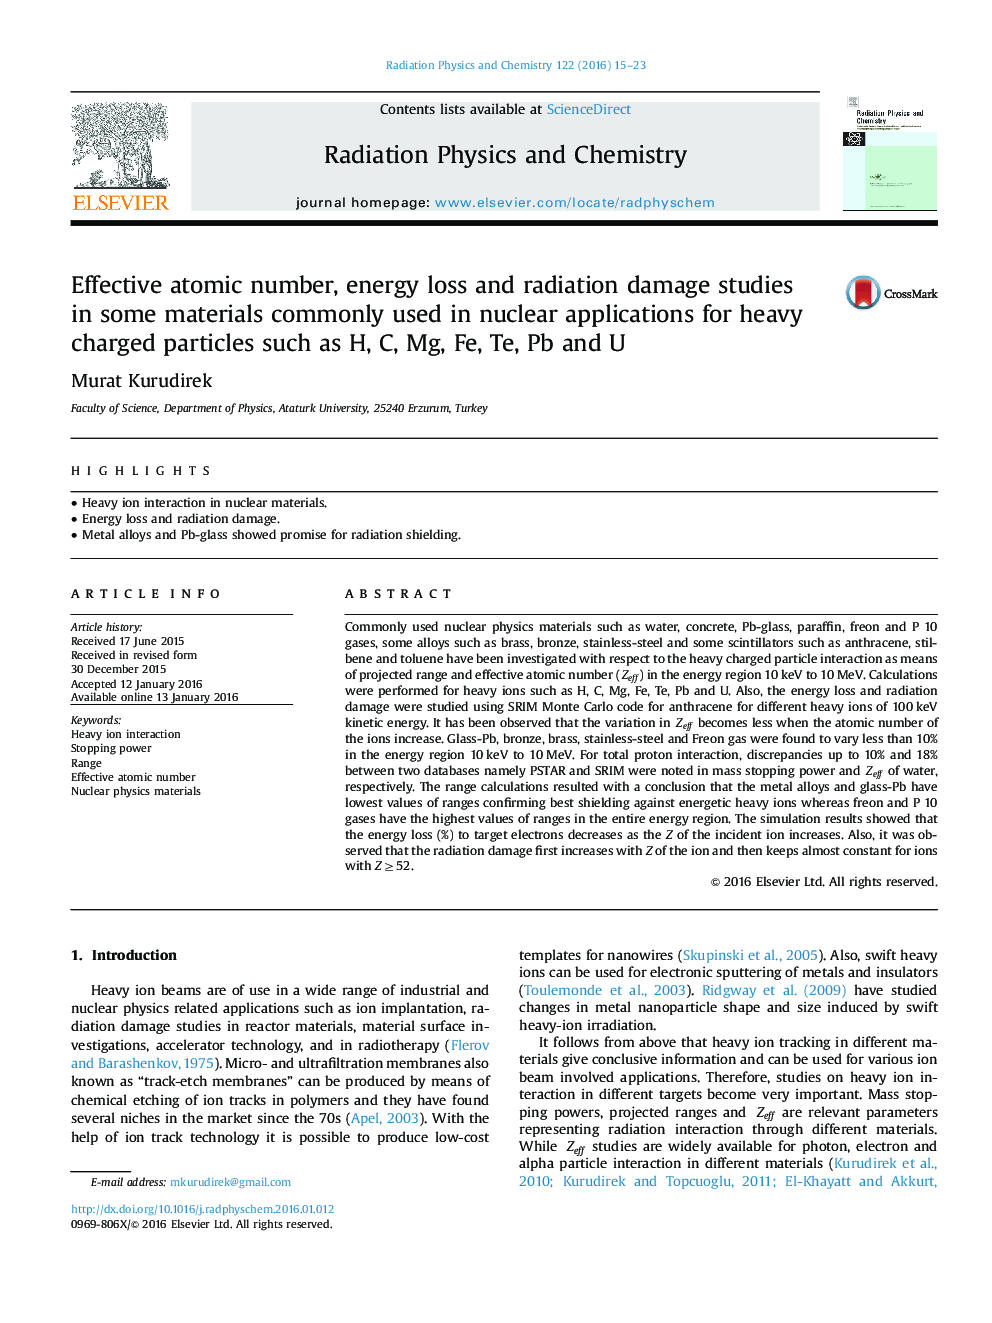 Effective atomic number, energy loss and radiation damage studies in some materials commonly used in nuclear applications for heavy charged particles such as H, C, Mg, Fe, Te, Pb and U